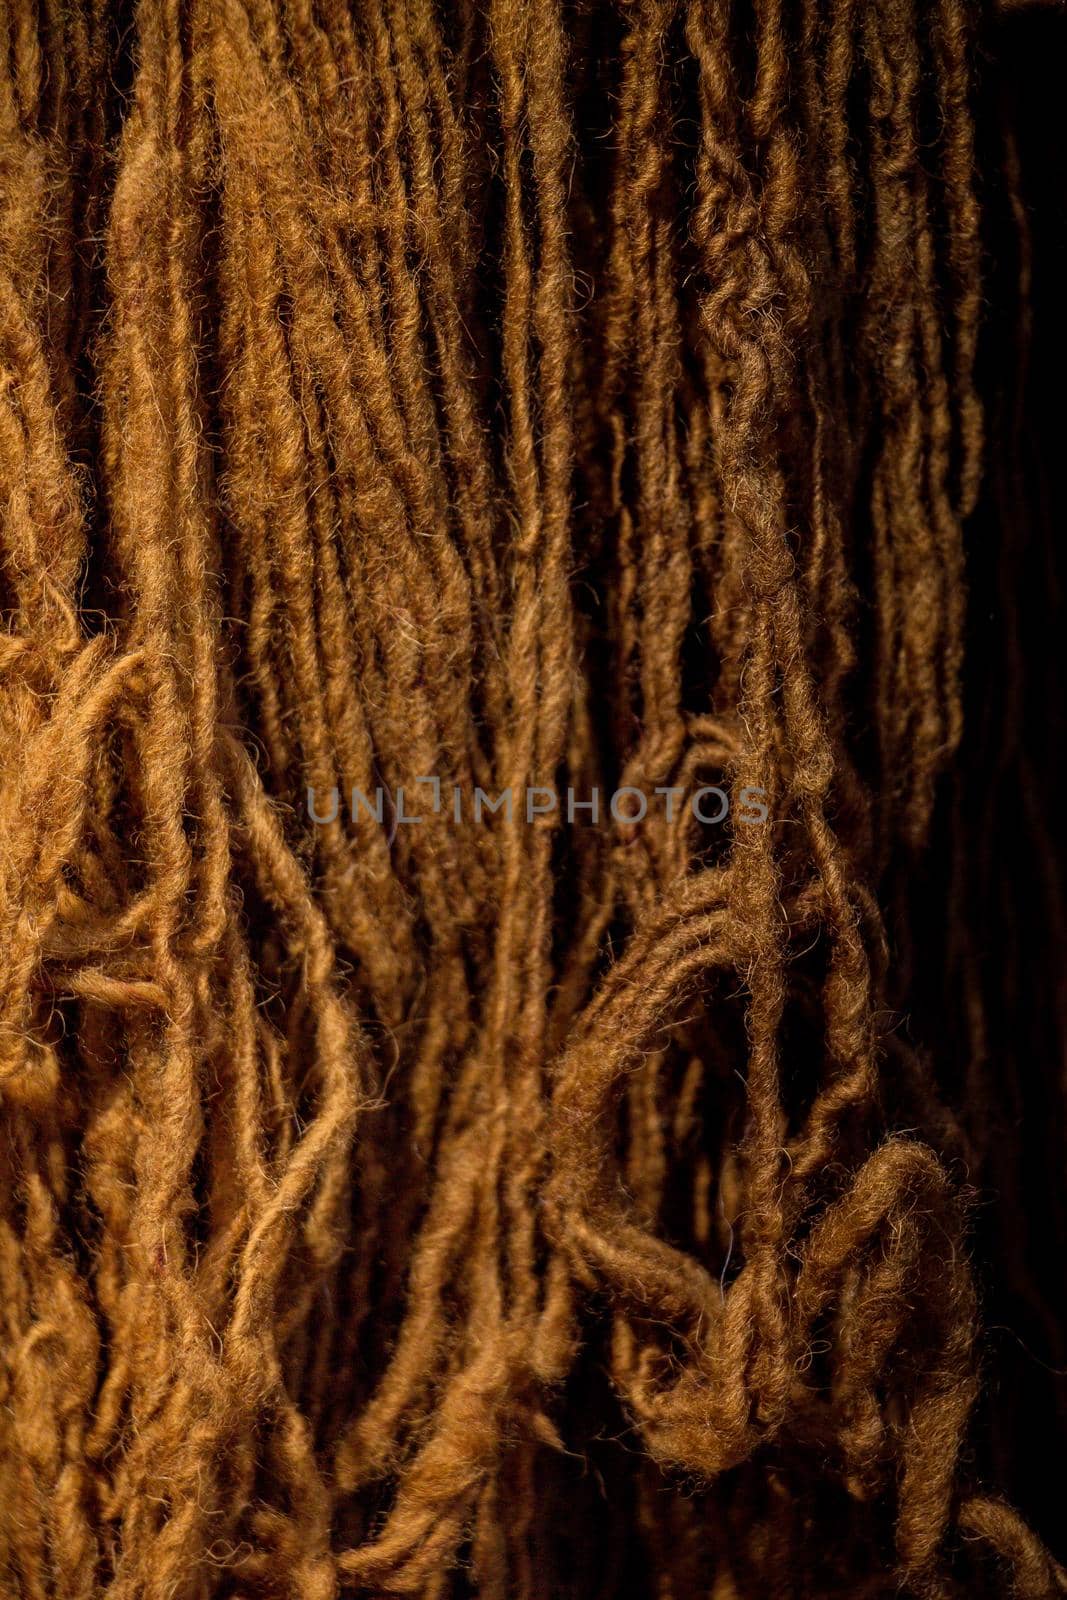 Natural wool thread dyed in color by berkay